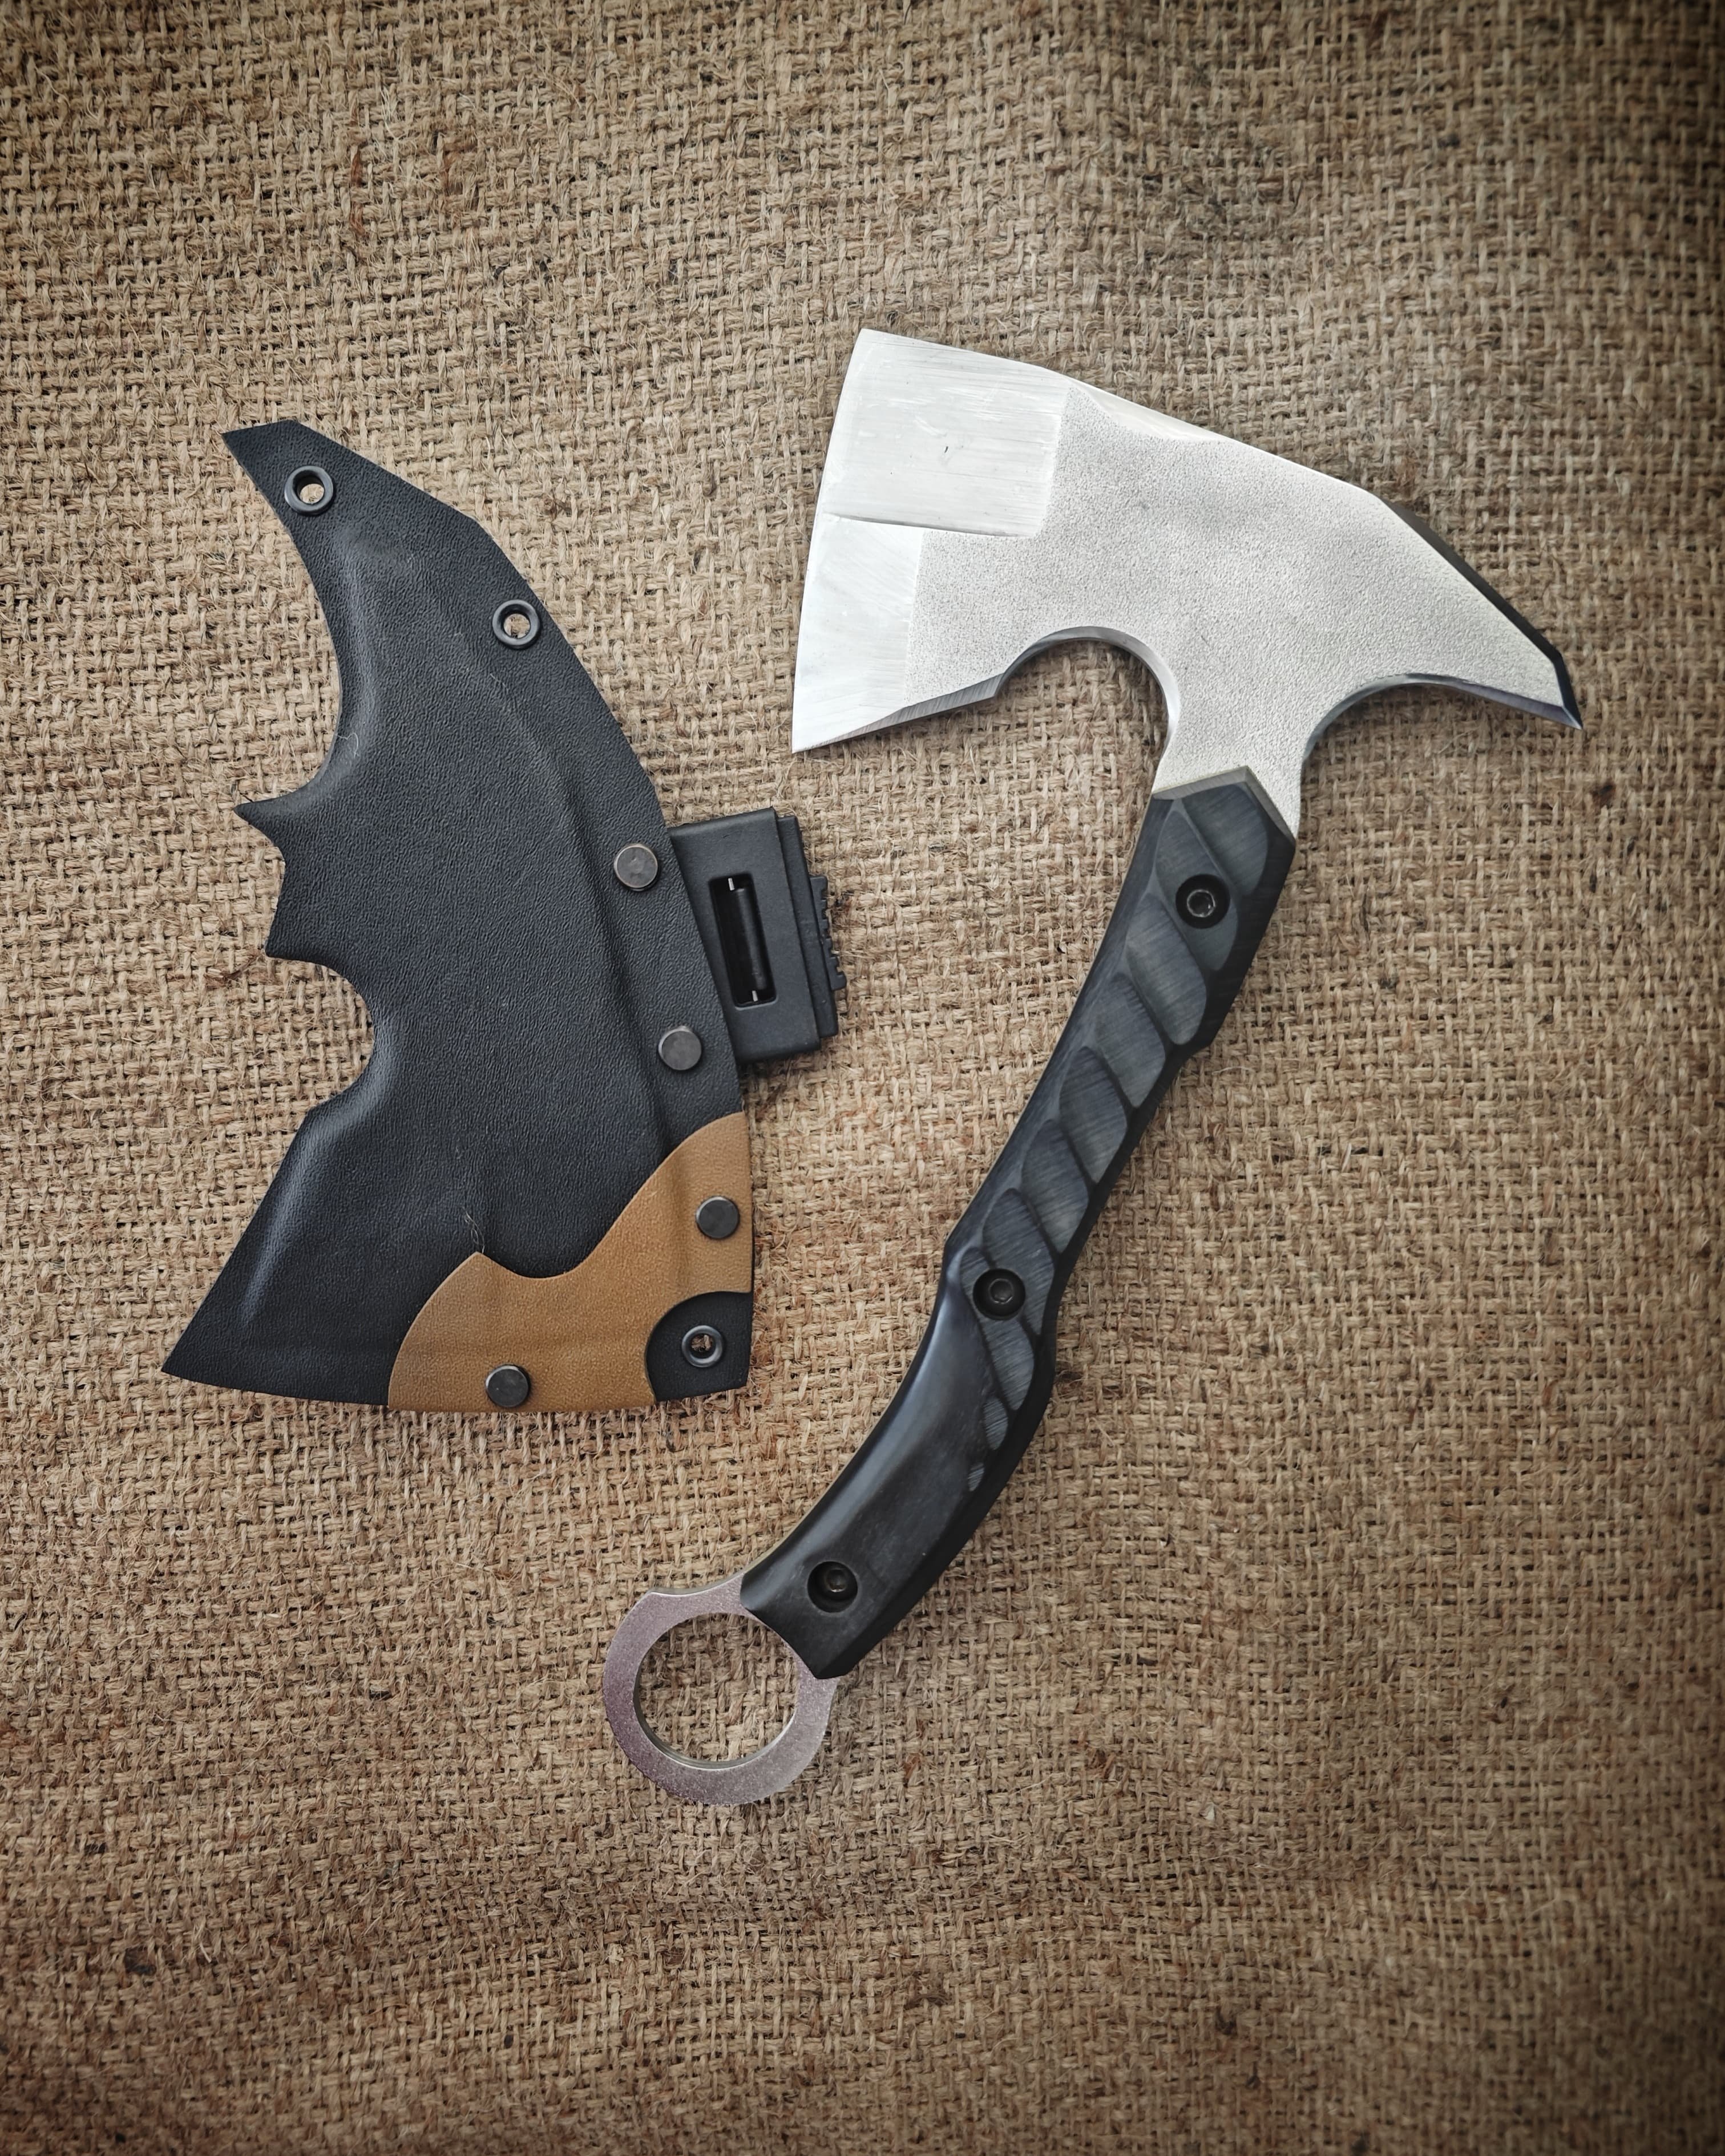 Original Carbon Steel Tactical Axe: A Powerful, Durable Gift That Overcomes Every Challenge! Combined Elegance and Strength with Kydex Sheath